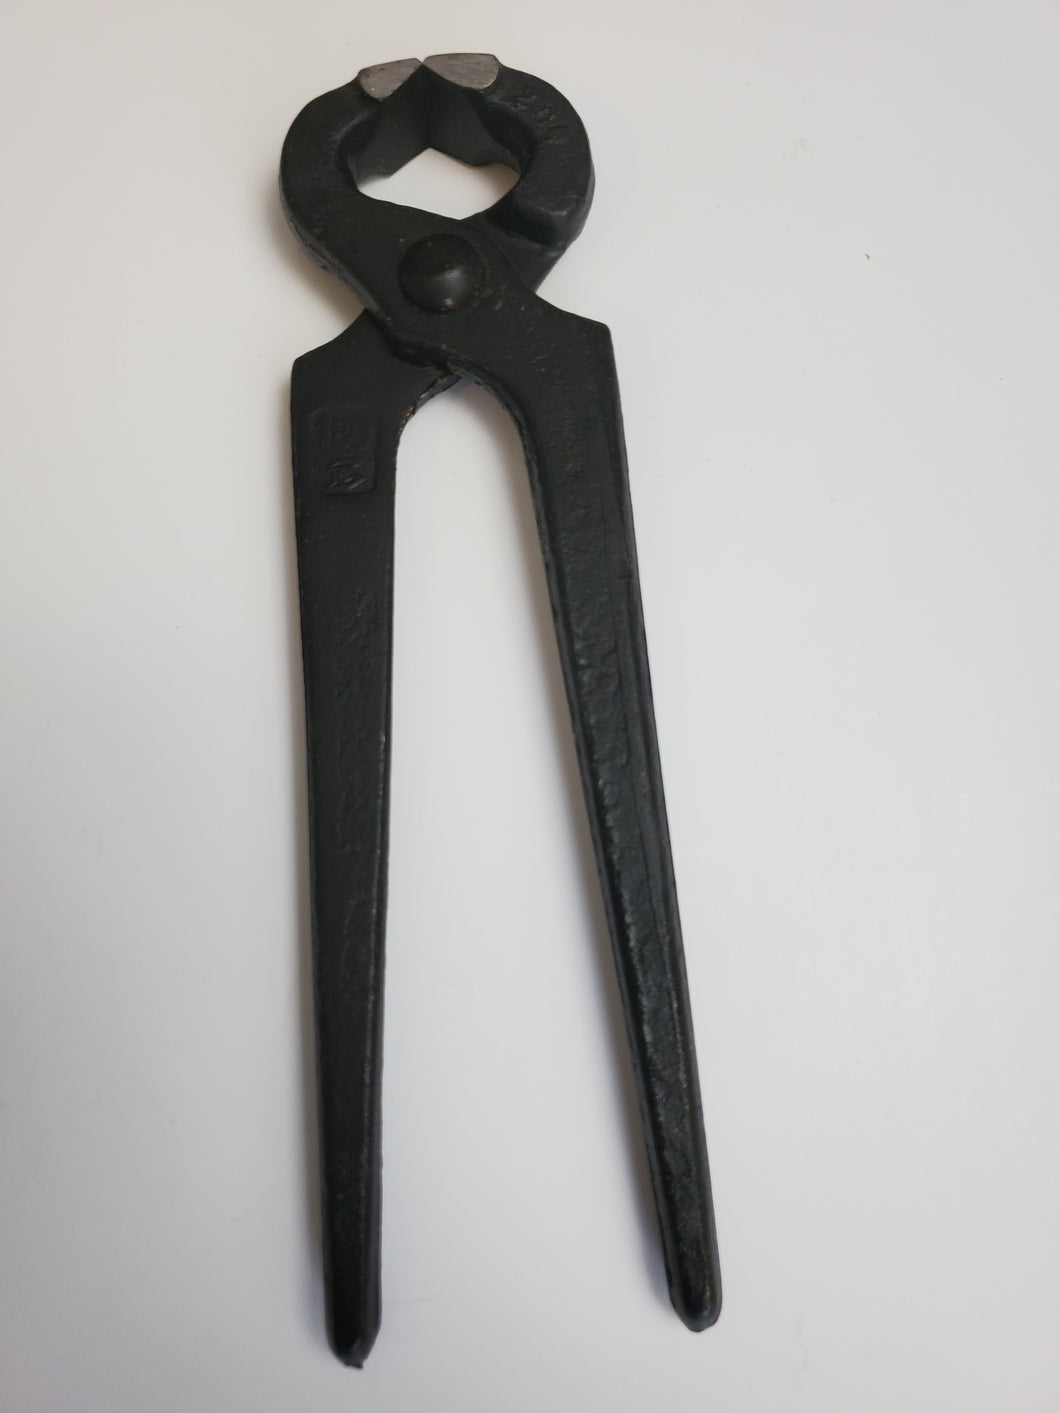 Pliers iron 7 inch